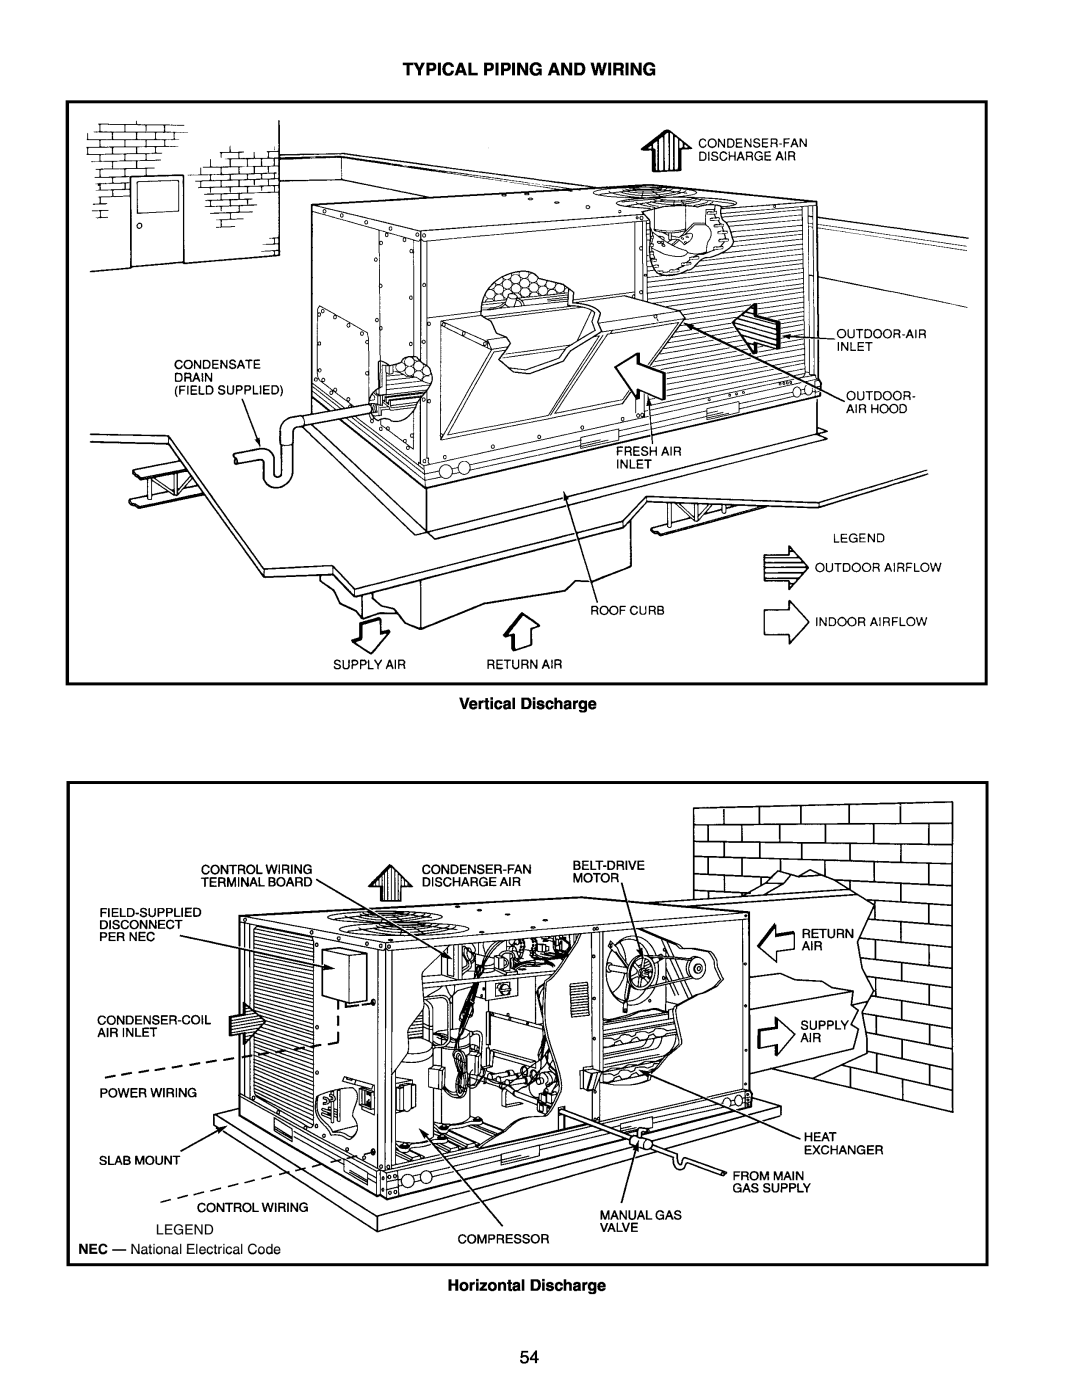 Bryant 581B manual Typical Piping And Wiring, Vertical Discharge, Horizontal Discharge 